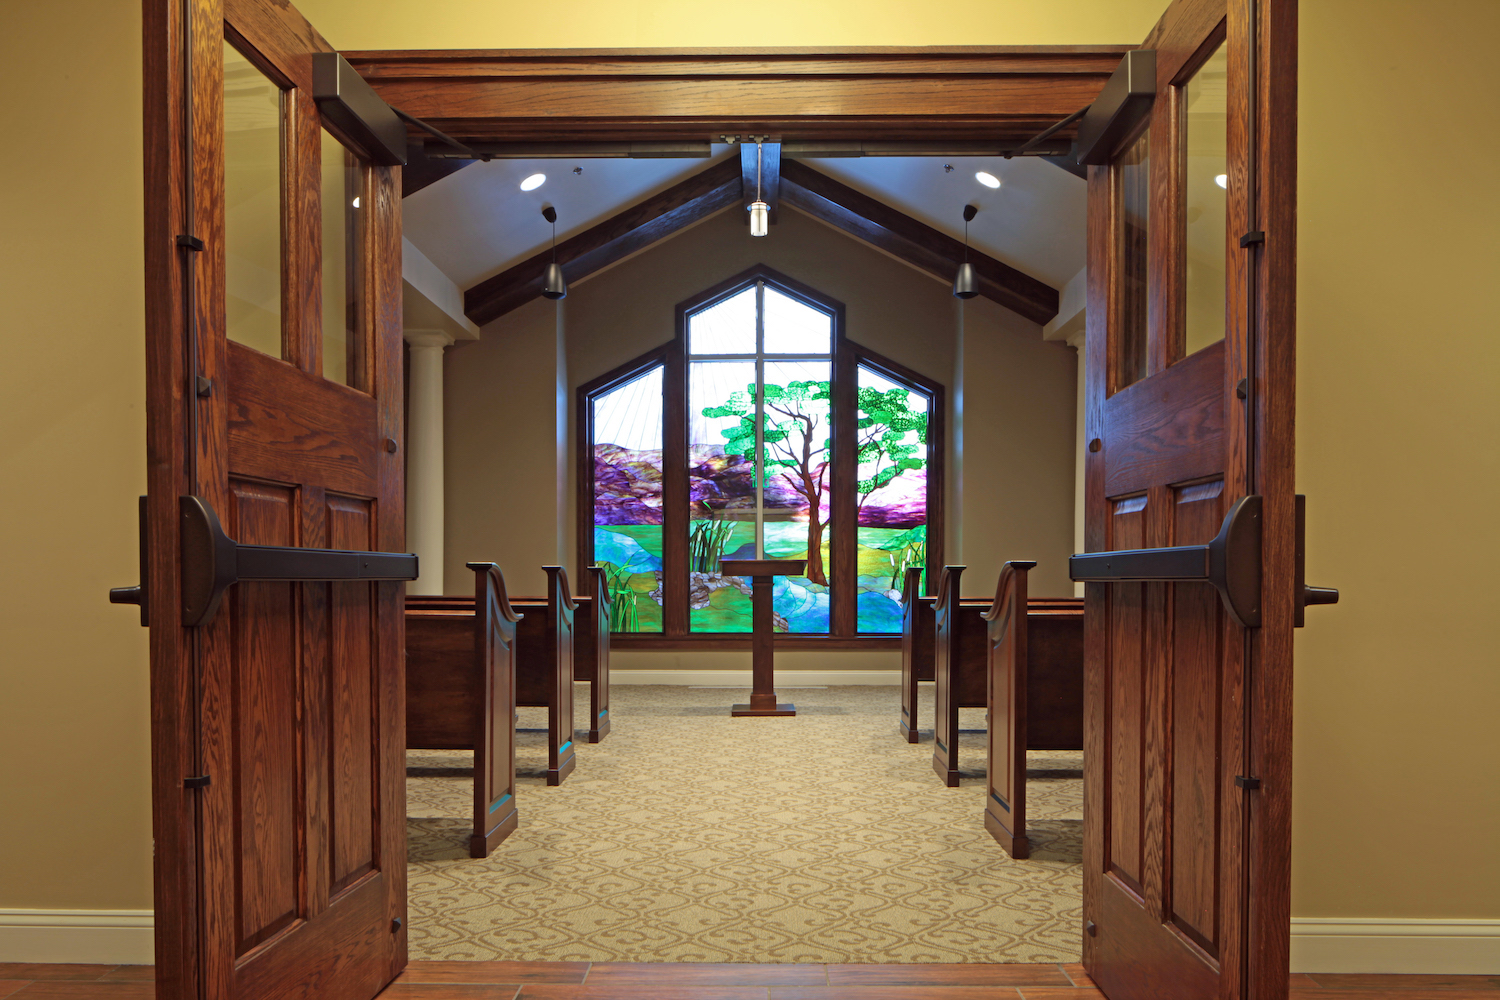 An open wooden door leading into a serene chapel with a vibrant stained glass window depicting a tree and nature scene. The room features wooden pews and a welcoming, peaceful atmosphere